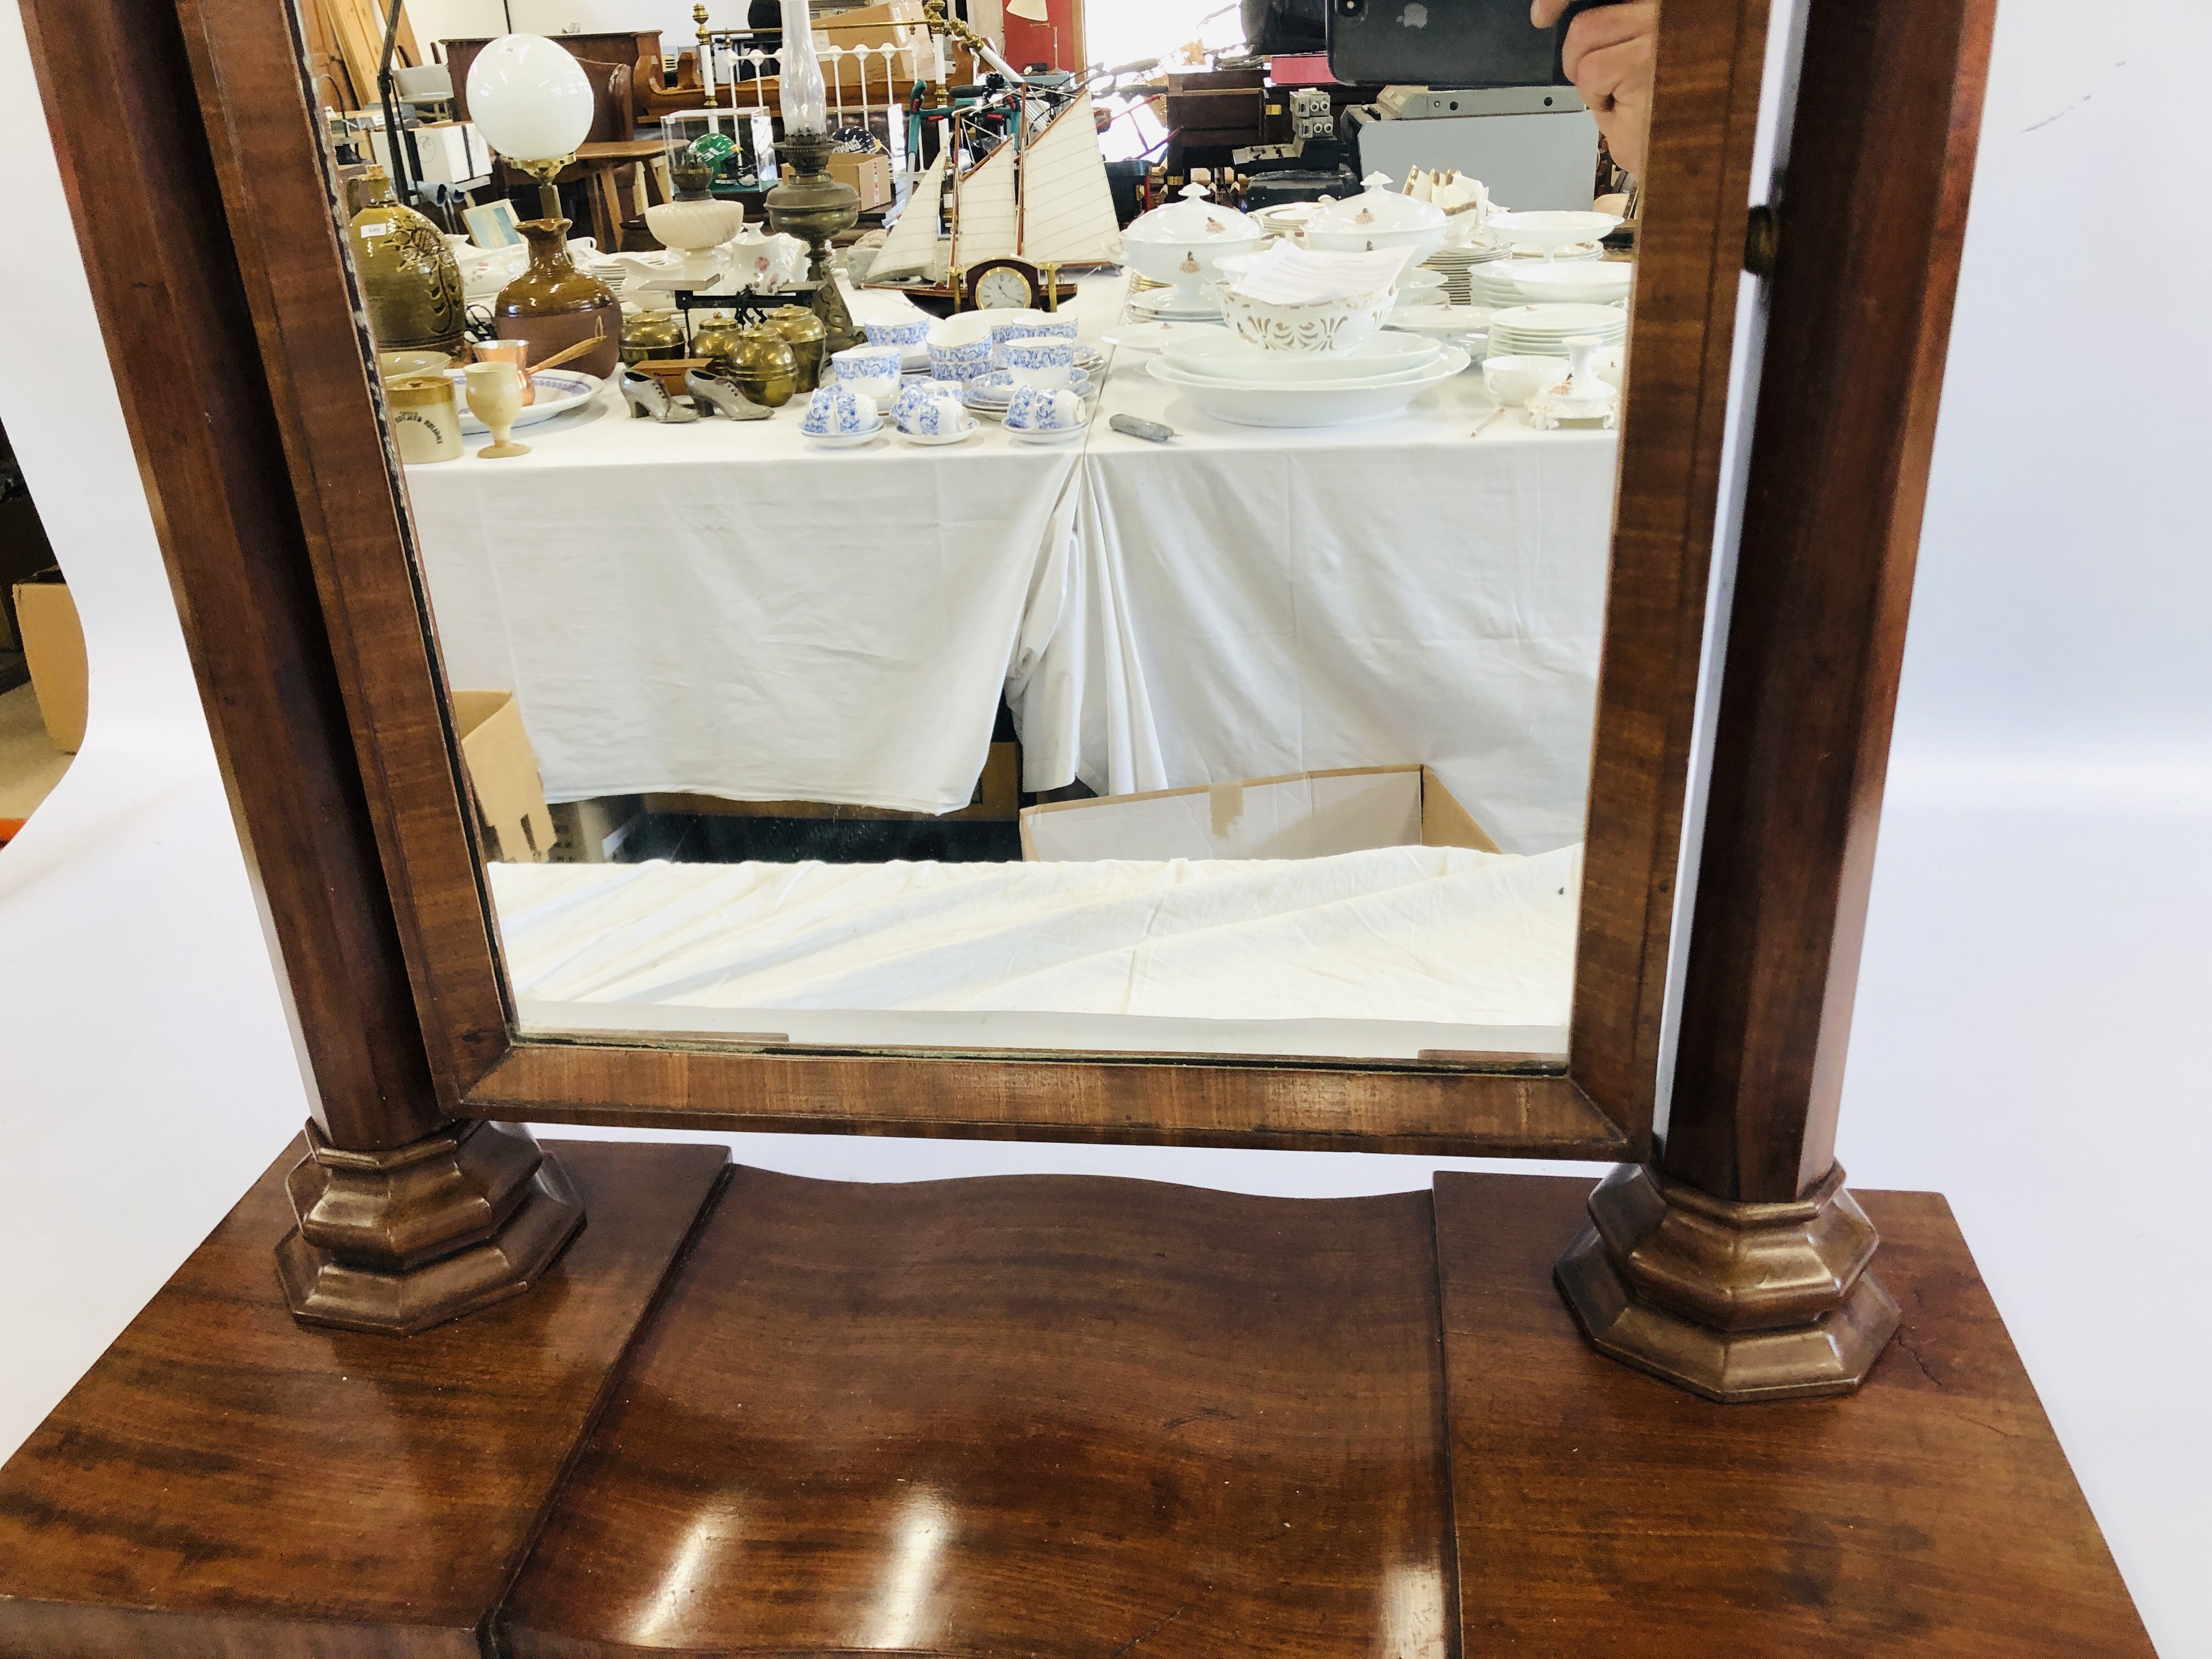 AN ANTIQUE MAHOGANY TWIN PILLAR DRESSING MIRROR ON SCROLLED FEET SUPPORTS - W 75CM X H 85CM. - Image 3 of 6